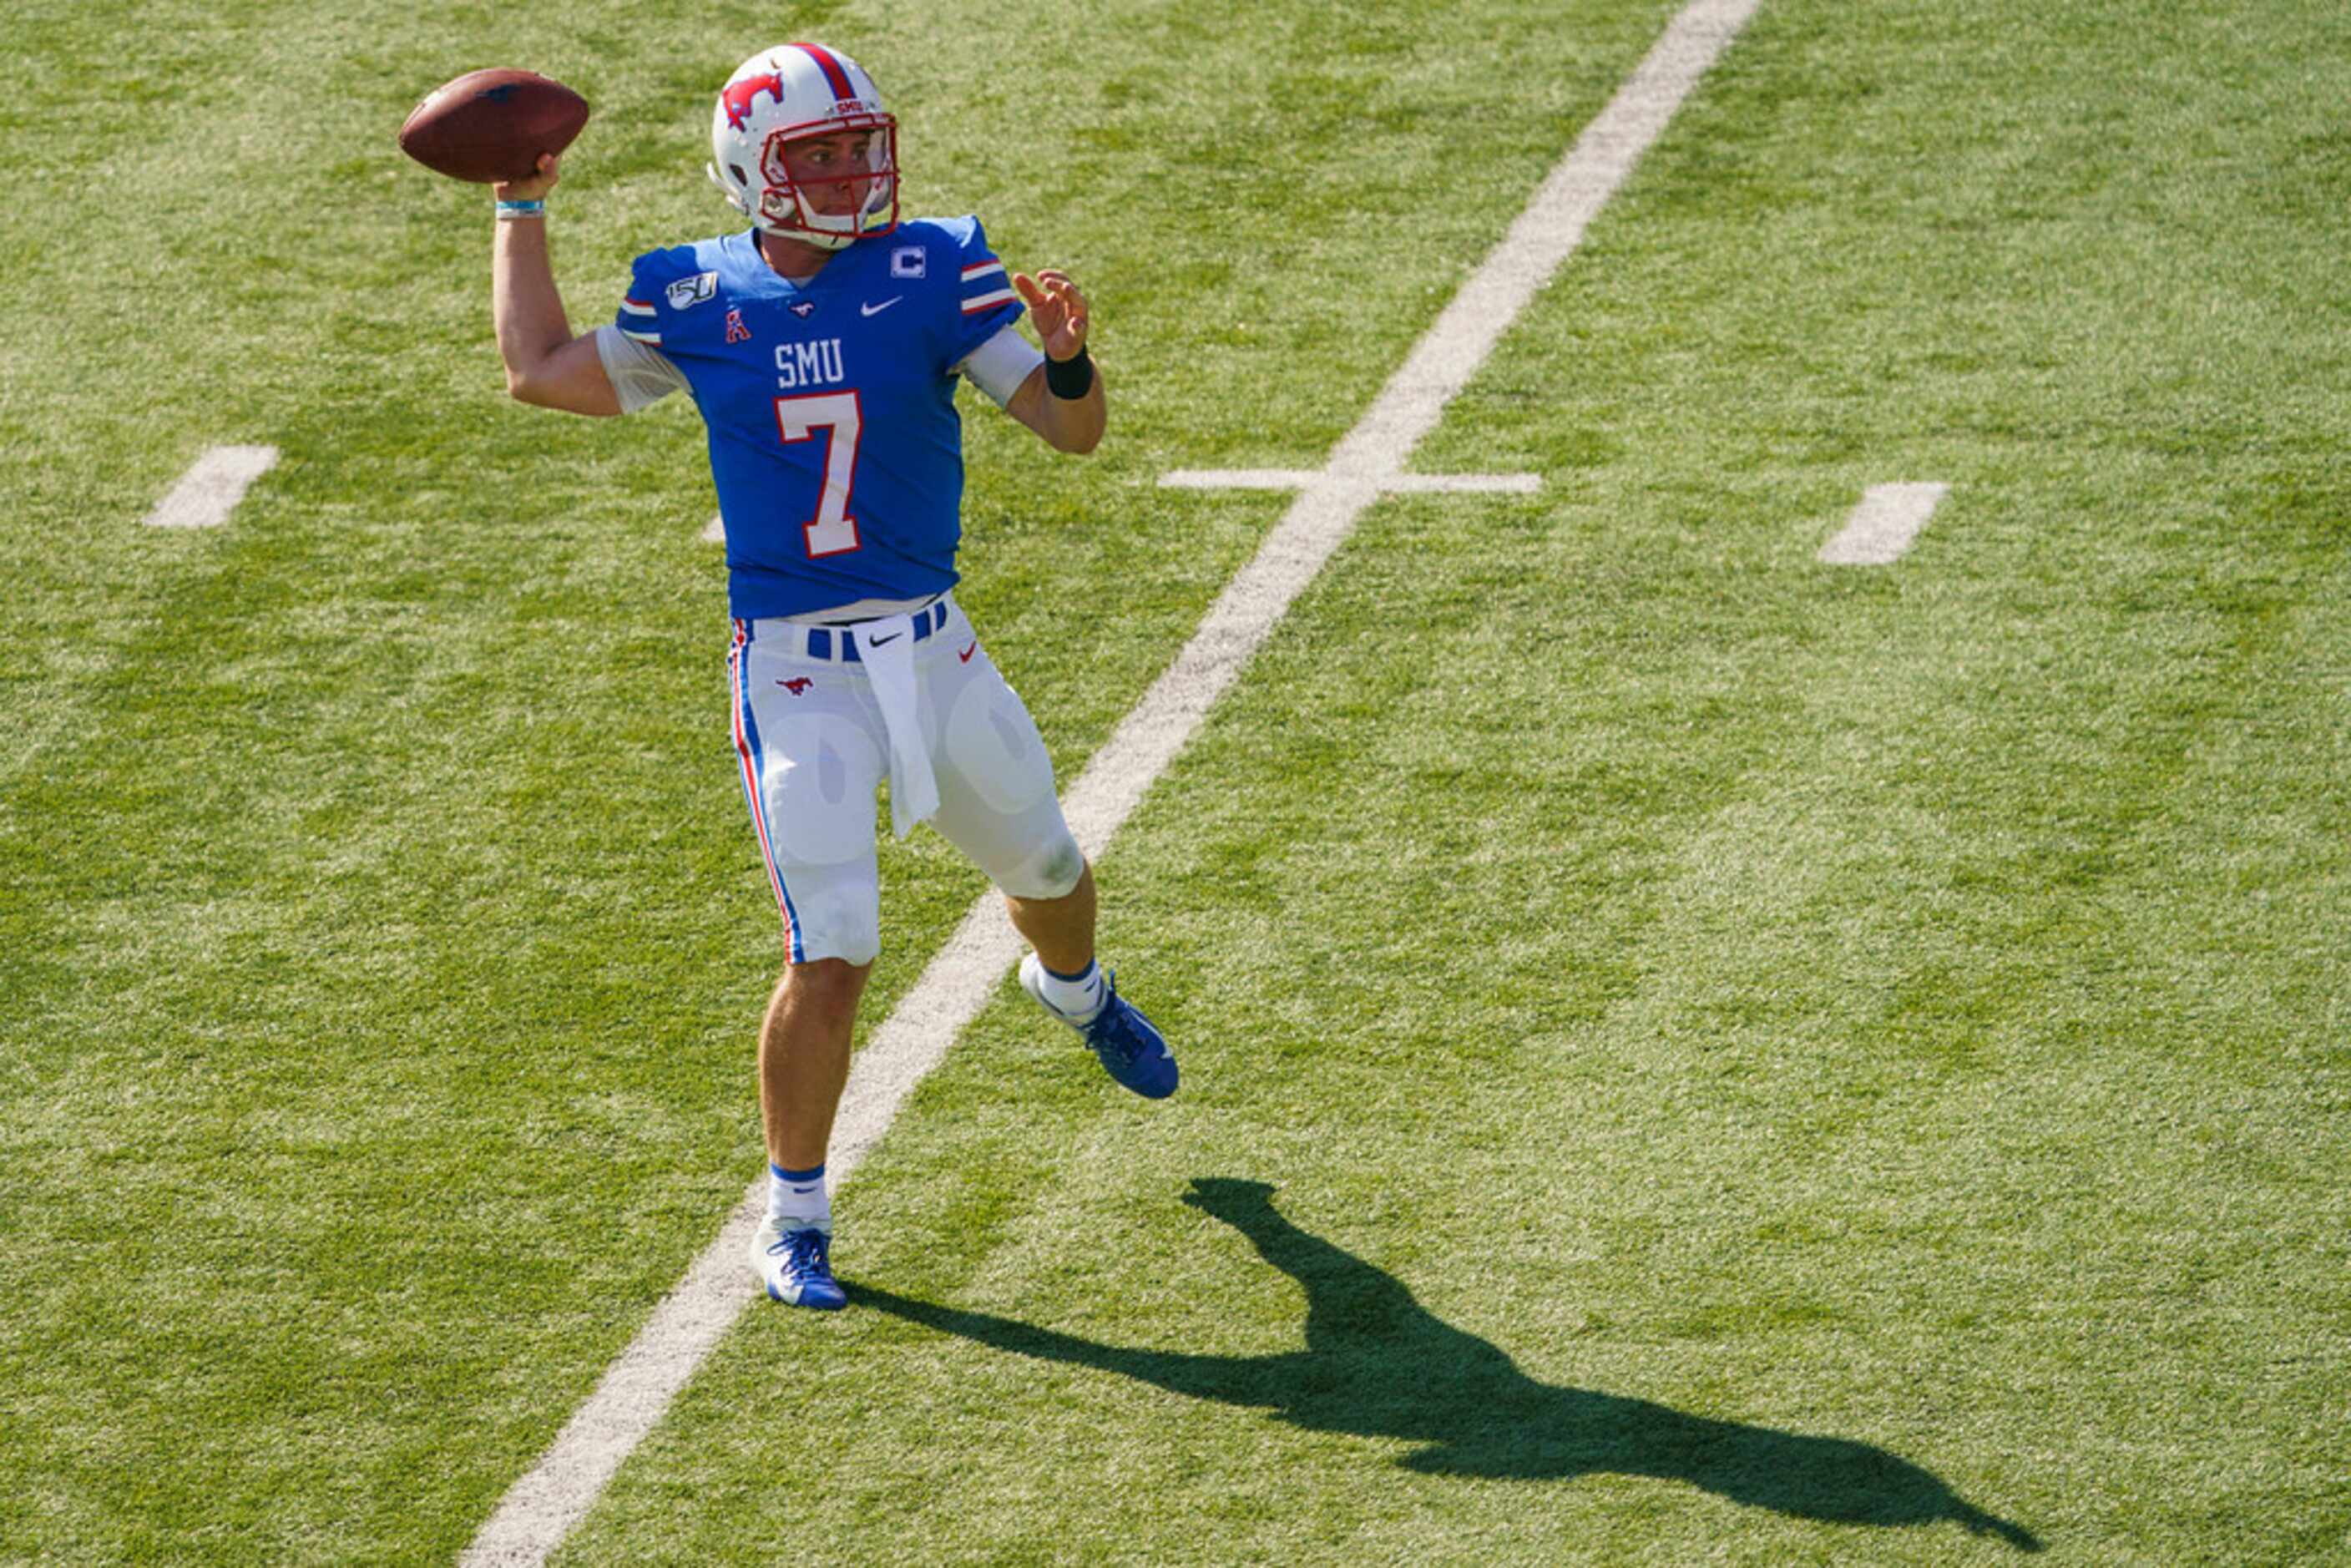 SMU quarterback Shane Buechele (7) throws a pass during the first half of an NCAA football...